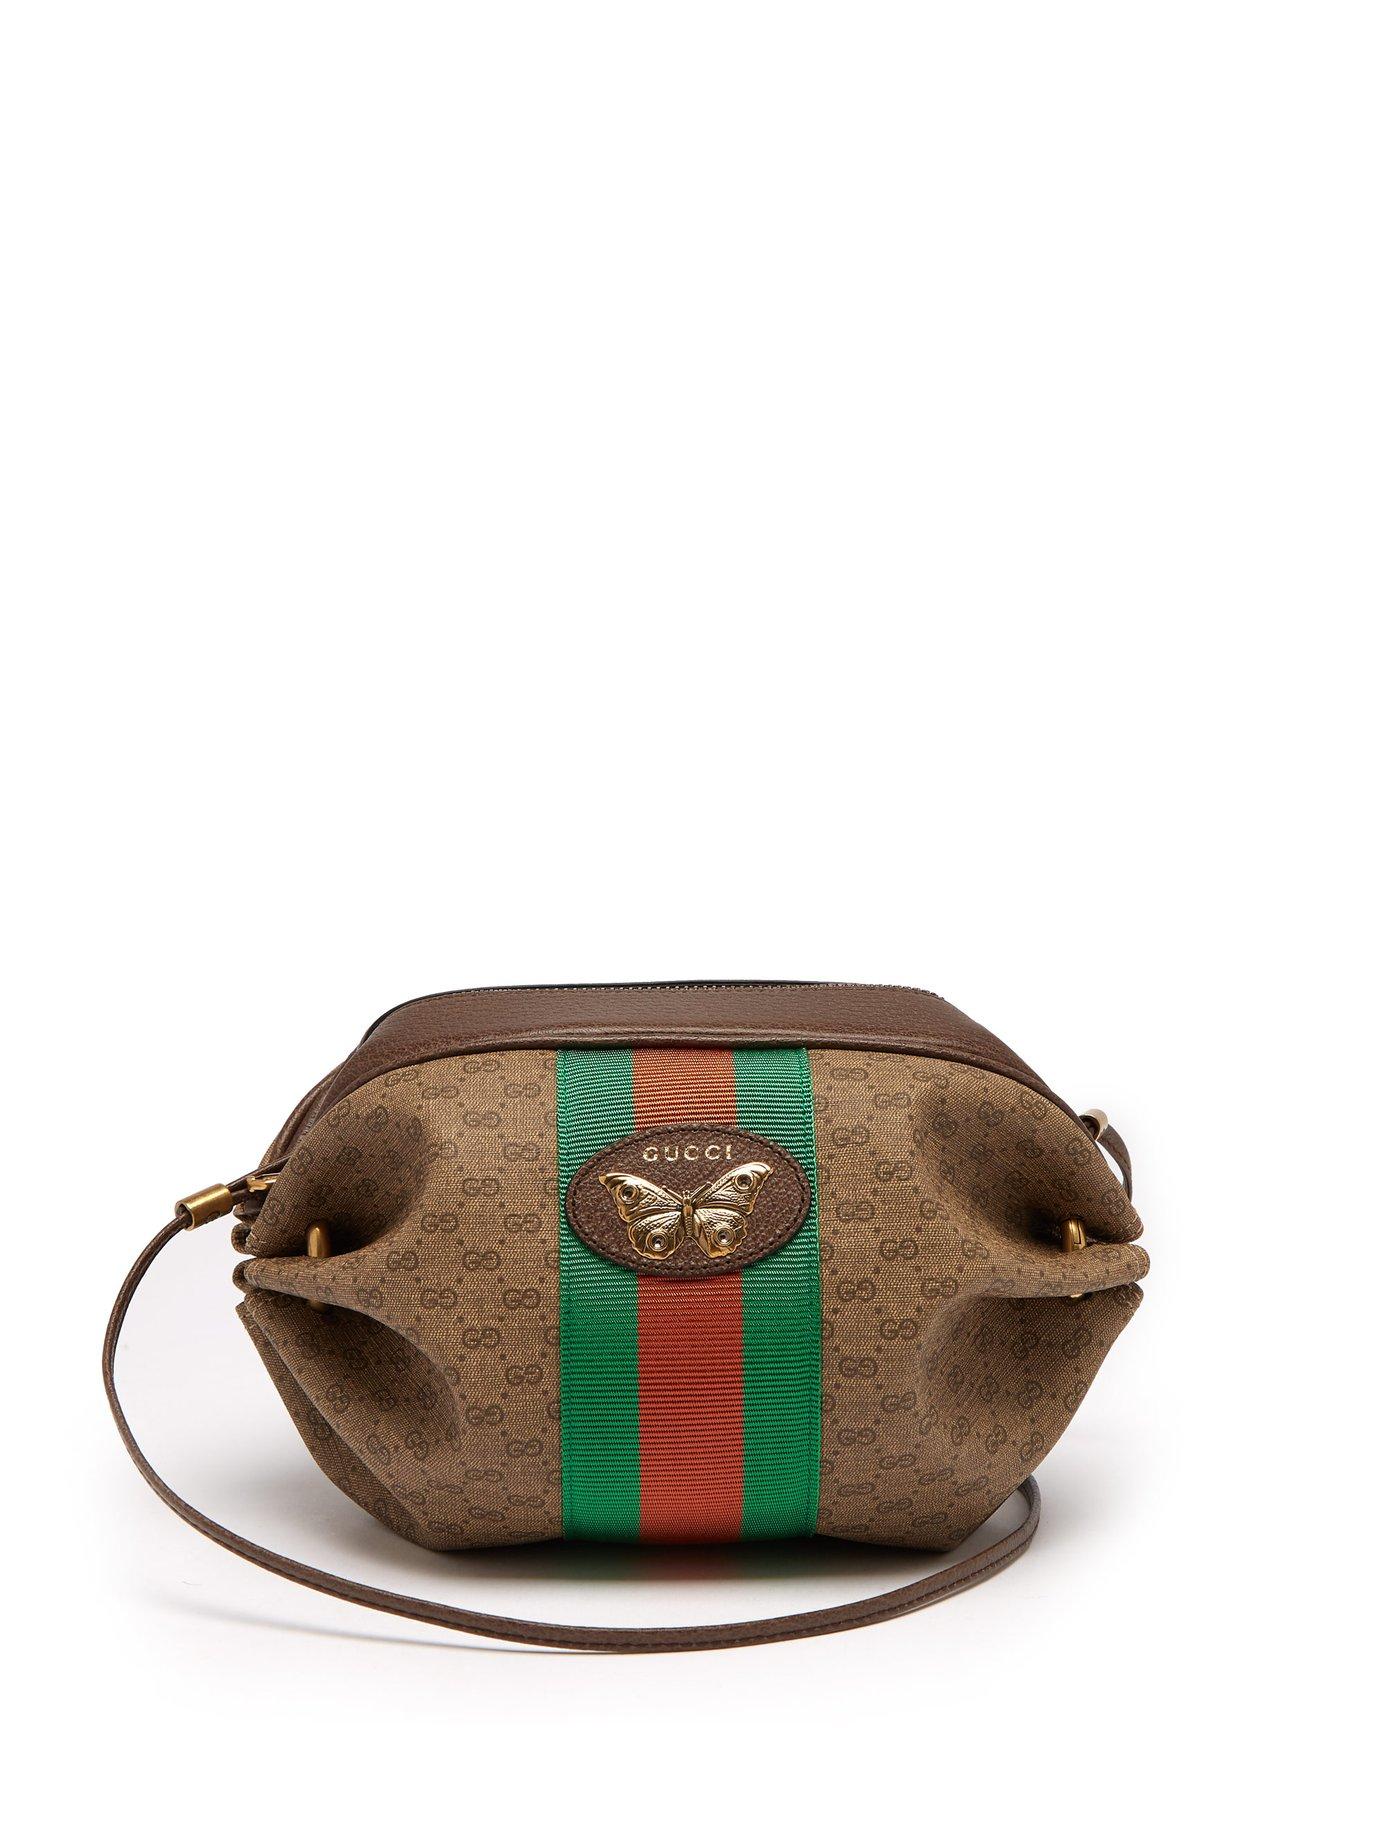 Gucci Gg Supreme Mini Canvas And Leather Cross Body Bag in Natural - Lyst